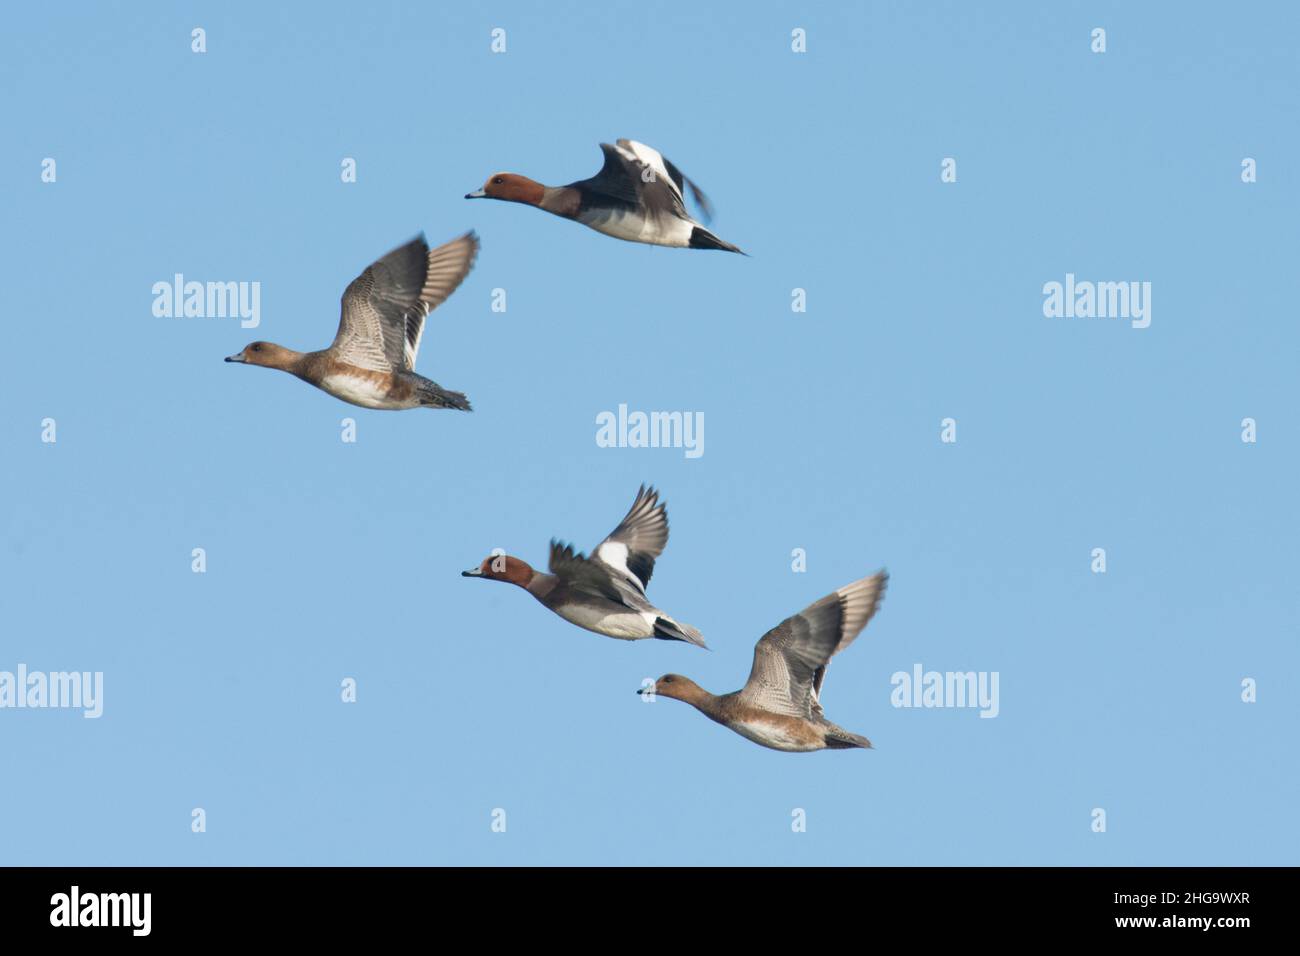 Wigeon, Anas penelope, two pairs, male and female, four ducks, flying in close formation in a blue sky, winter, UK Stock Photo